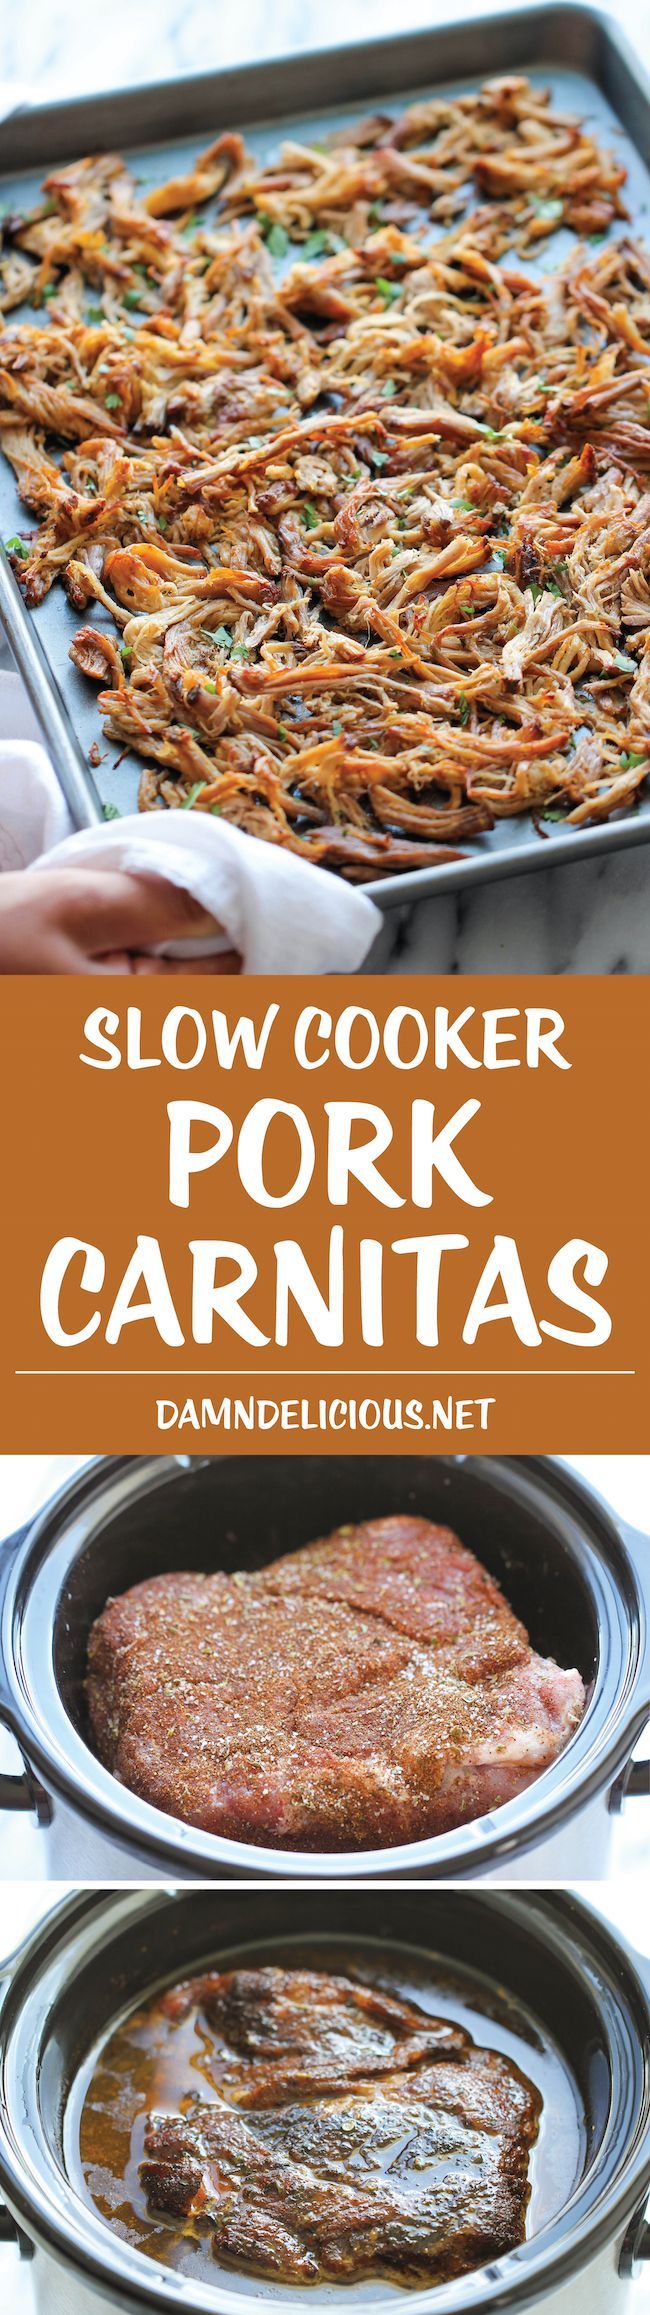 Slow Cooker Pork Carnitas – The easiest carnitas you will ever make in the crockpot, cooked low and slow for the most amazing